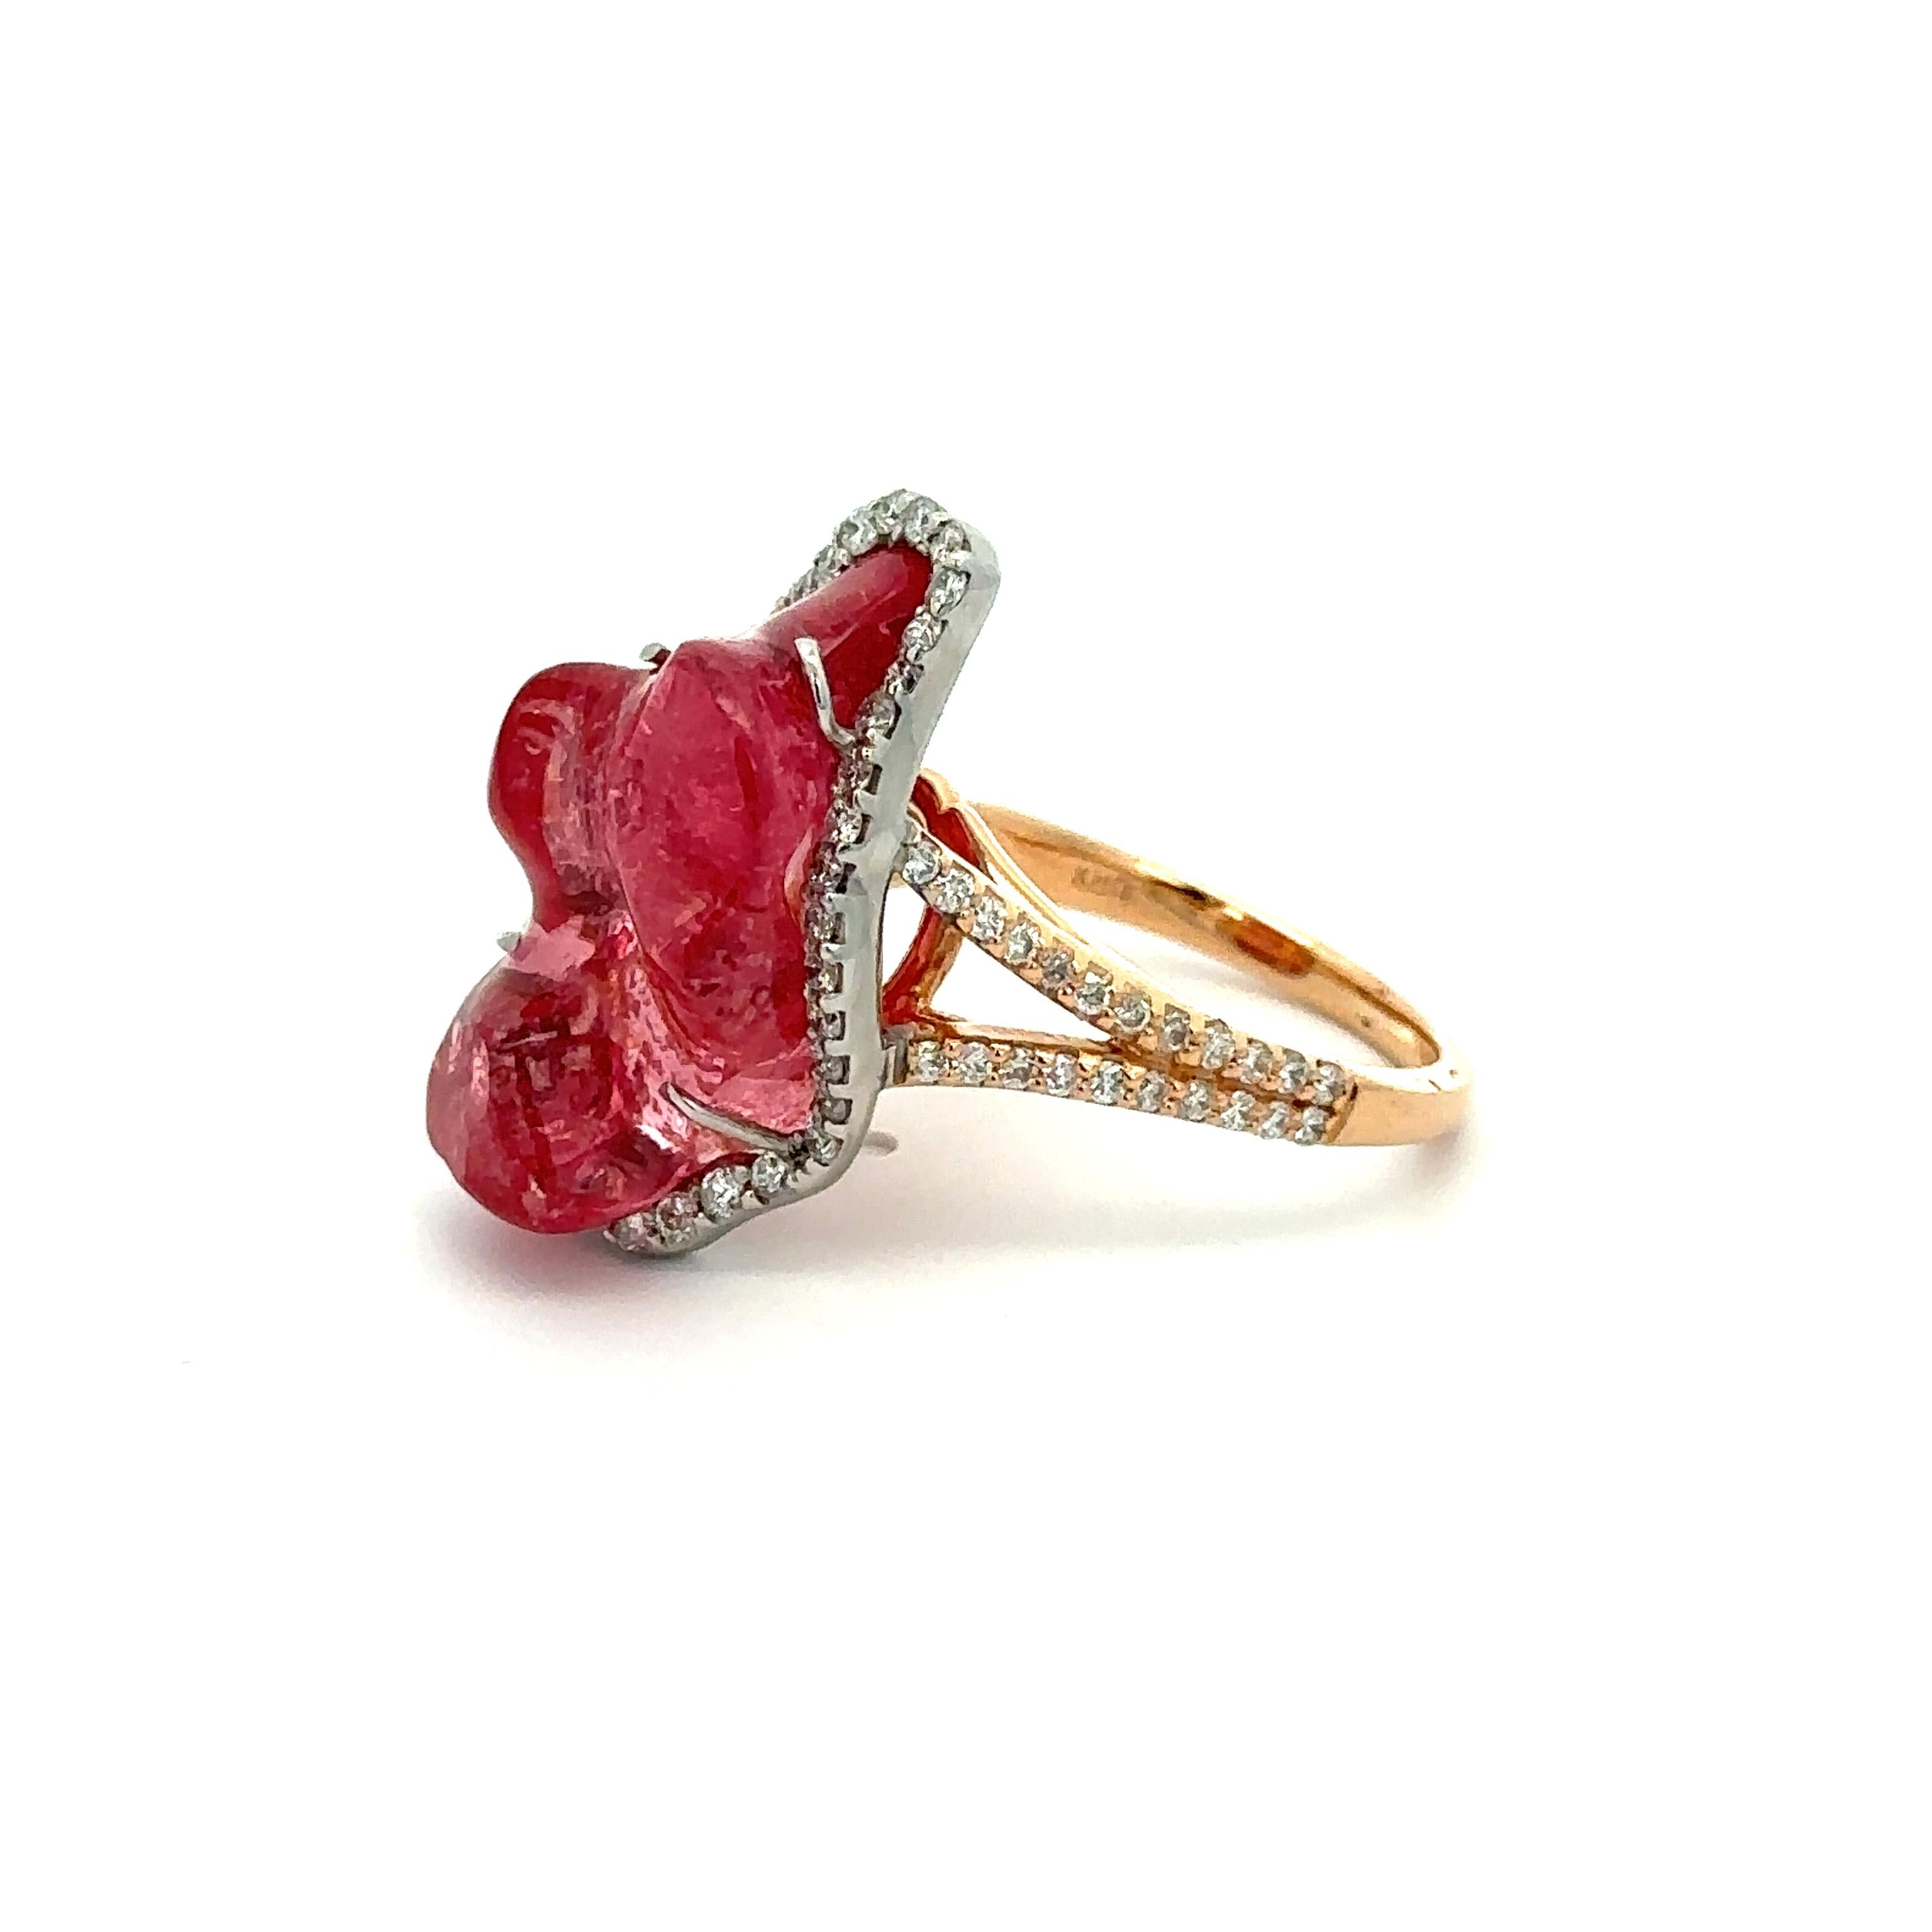 Kimberly McDonald 18k Gold GIA Orangy Pink Tumbled Free Form Spinel Diamond Ring In Excellent Condition For Sale In Montclair, NJ